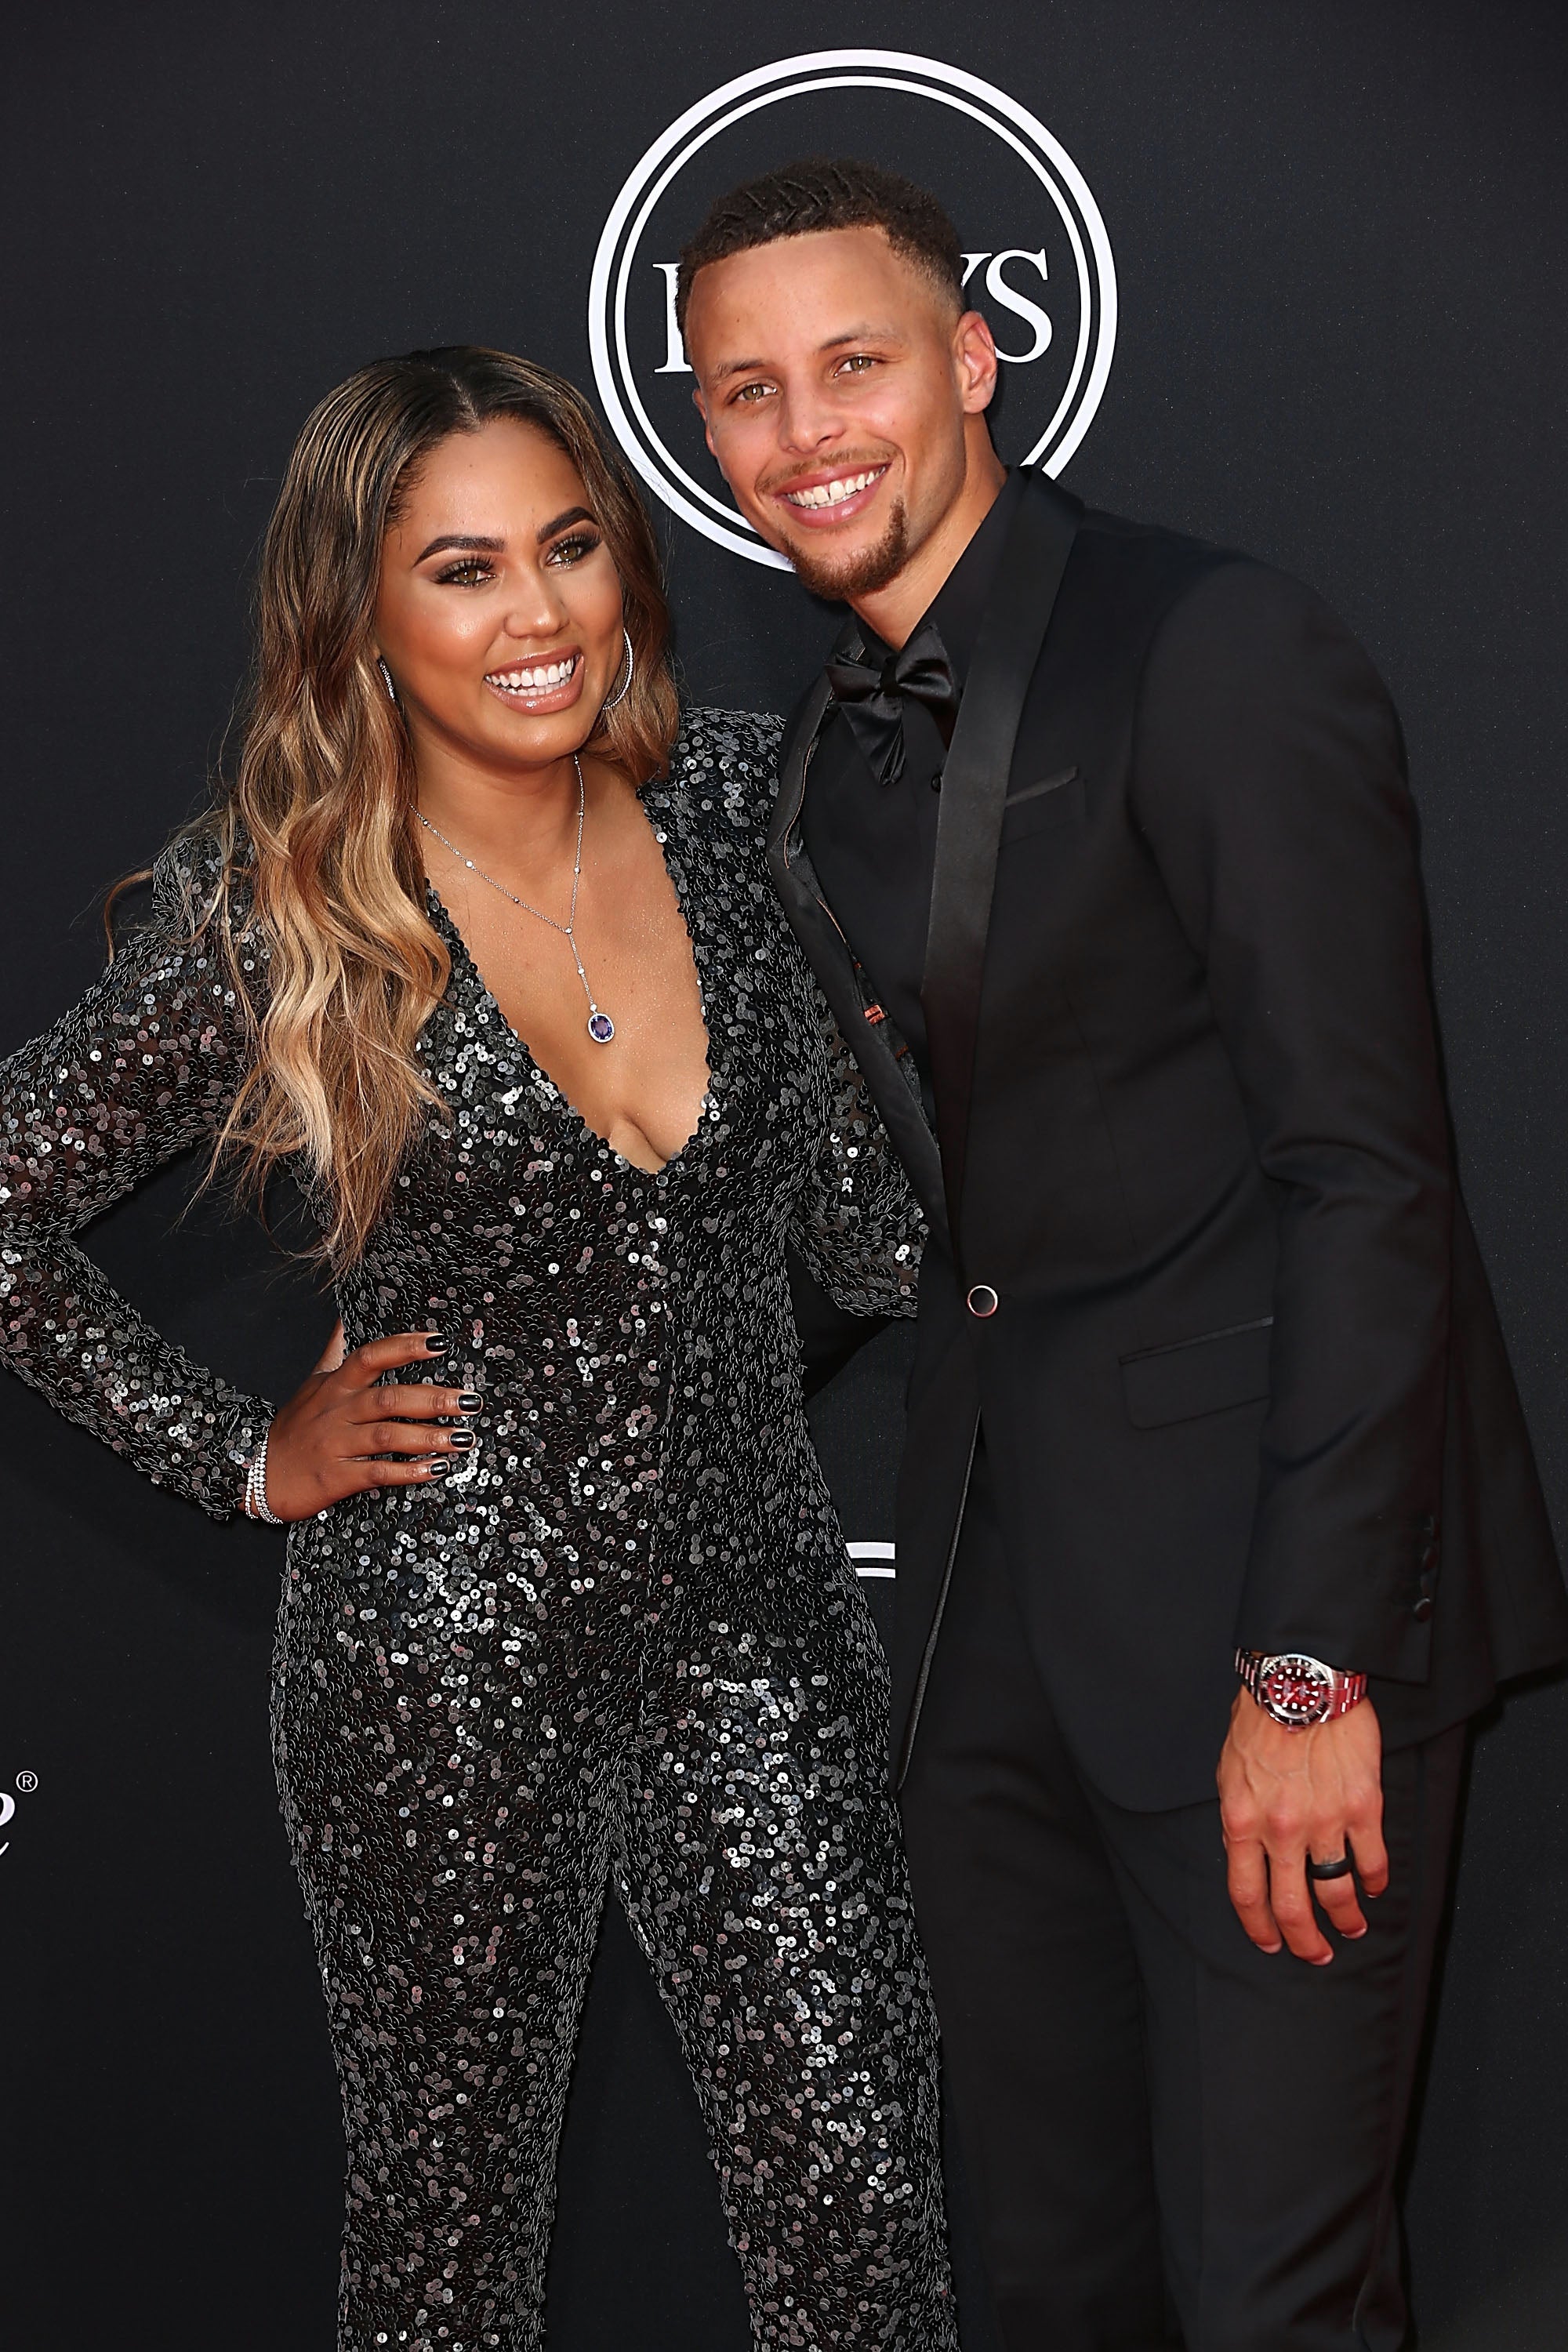 Goals! Famous Couples Who Have Been Together More Than Half Their Lives